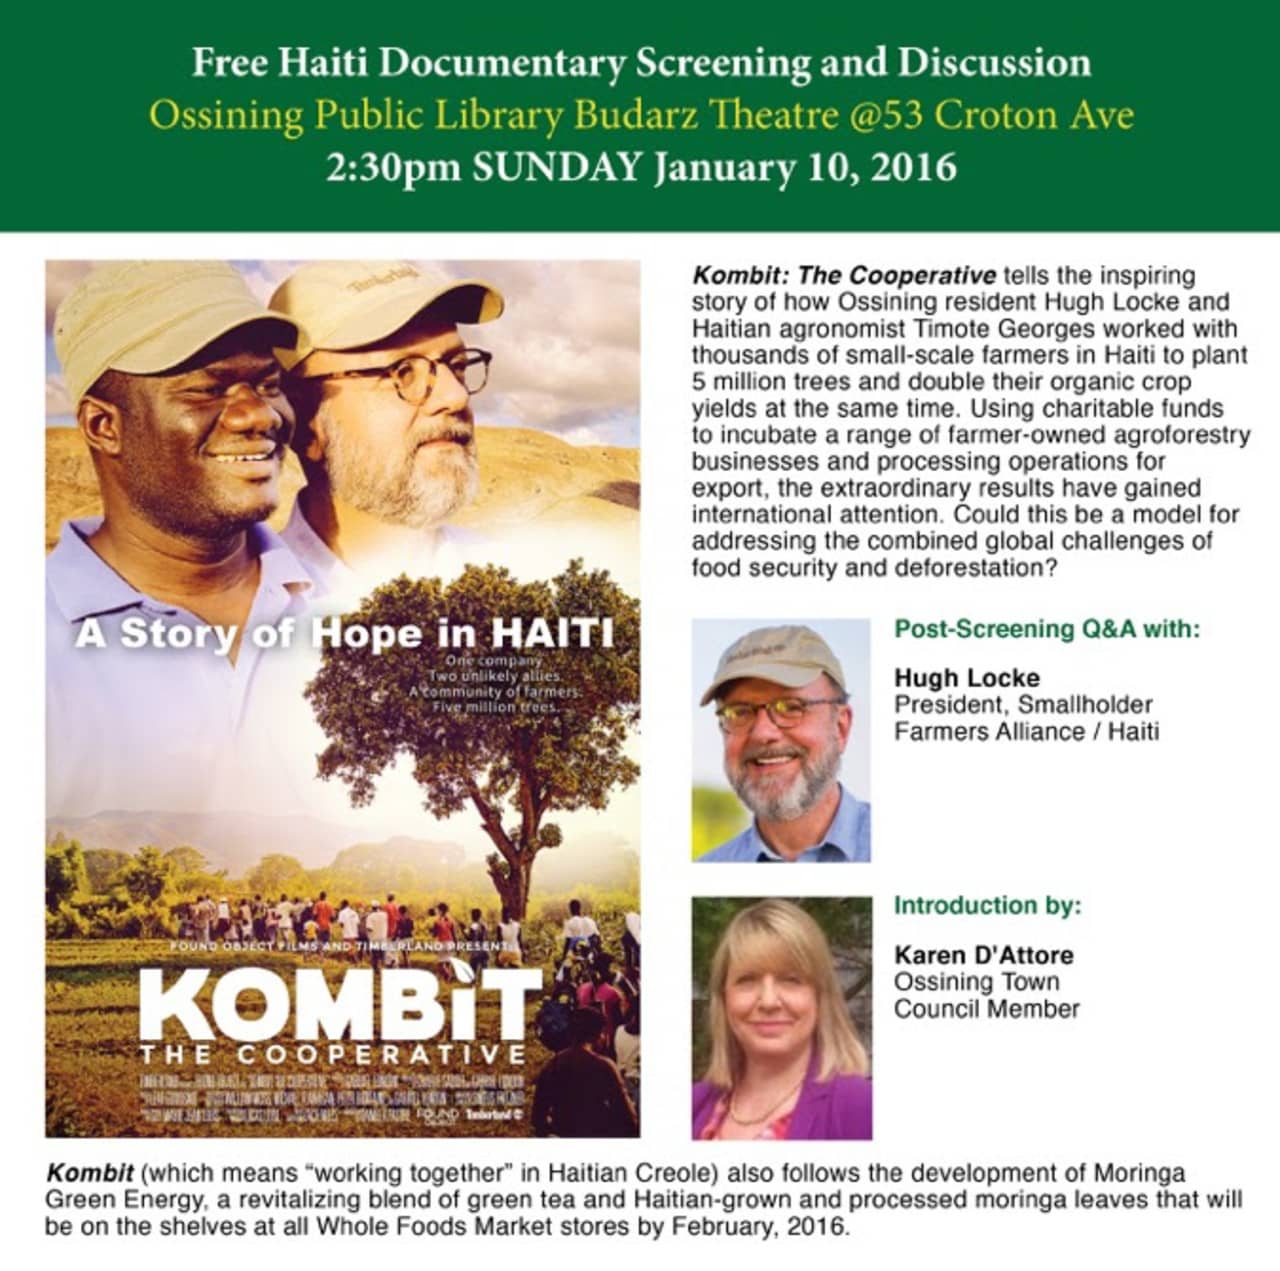 The Ossining Public Library will screen the documentary "Kombit: The Cooperative" on Sunday at 2:30 p.m.